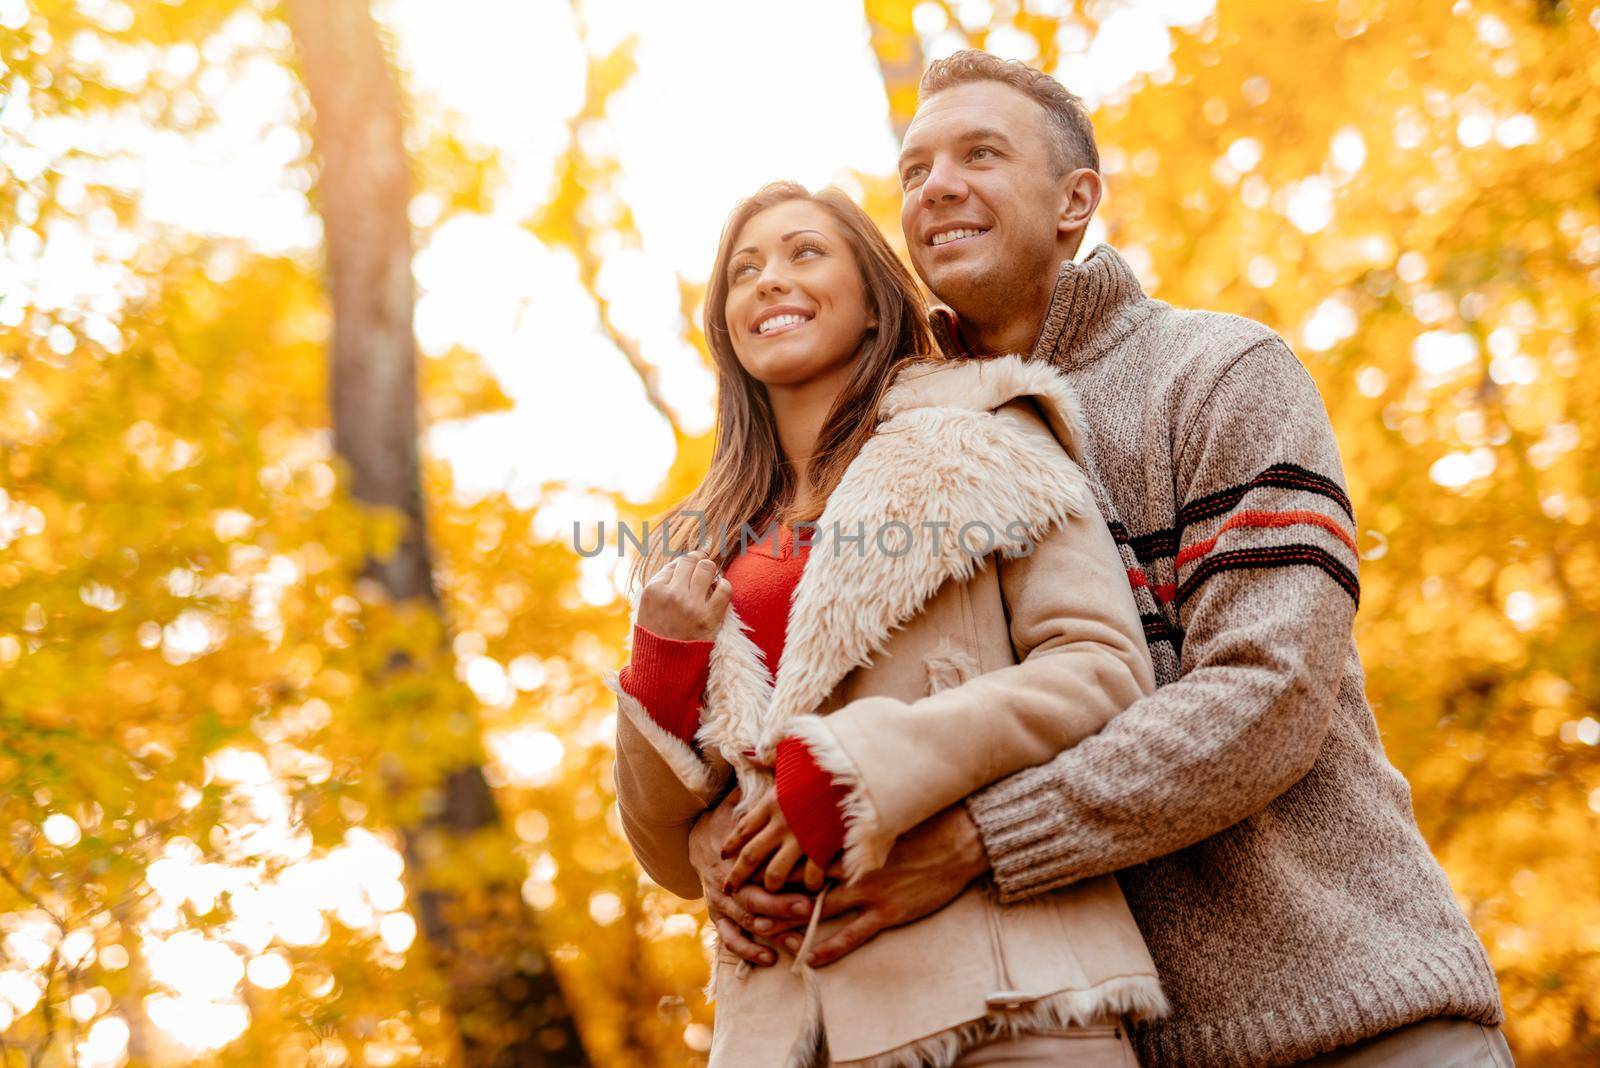 Beautiful smiling couple enjoying in sunny forest in autumn colors.